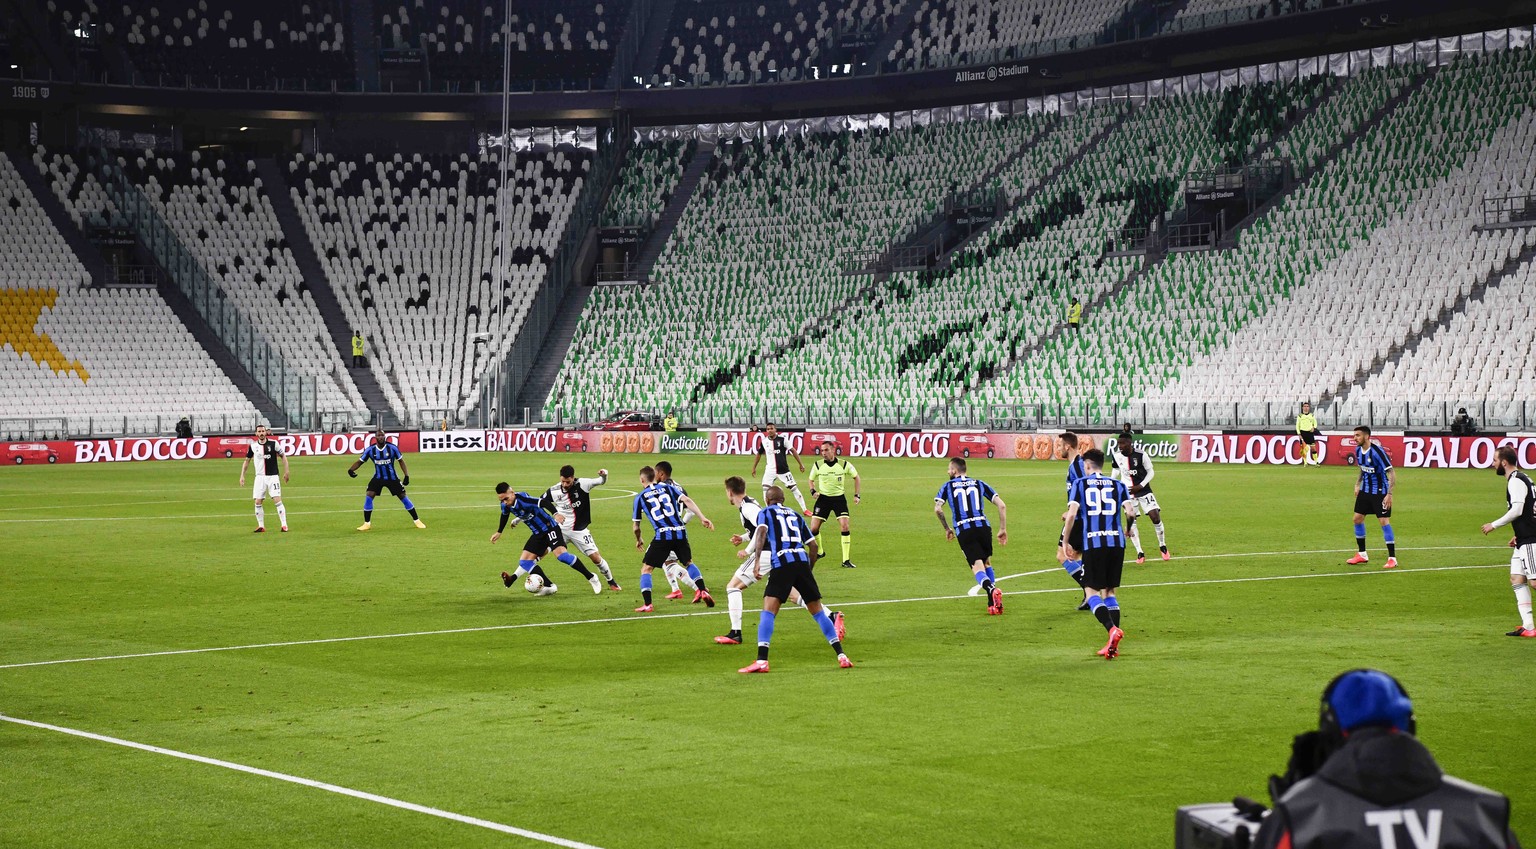 The Serie A soccer match between Inter Milan and Juventus at the Allianz Stadium in Turin, Italy, Sunday March 8, 2020. The match was played to a closed stadium as a measure against coronavirus contag ...